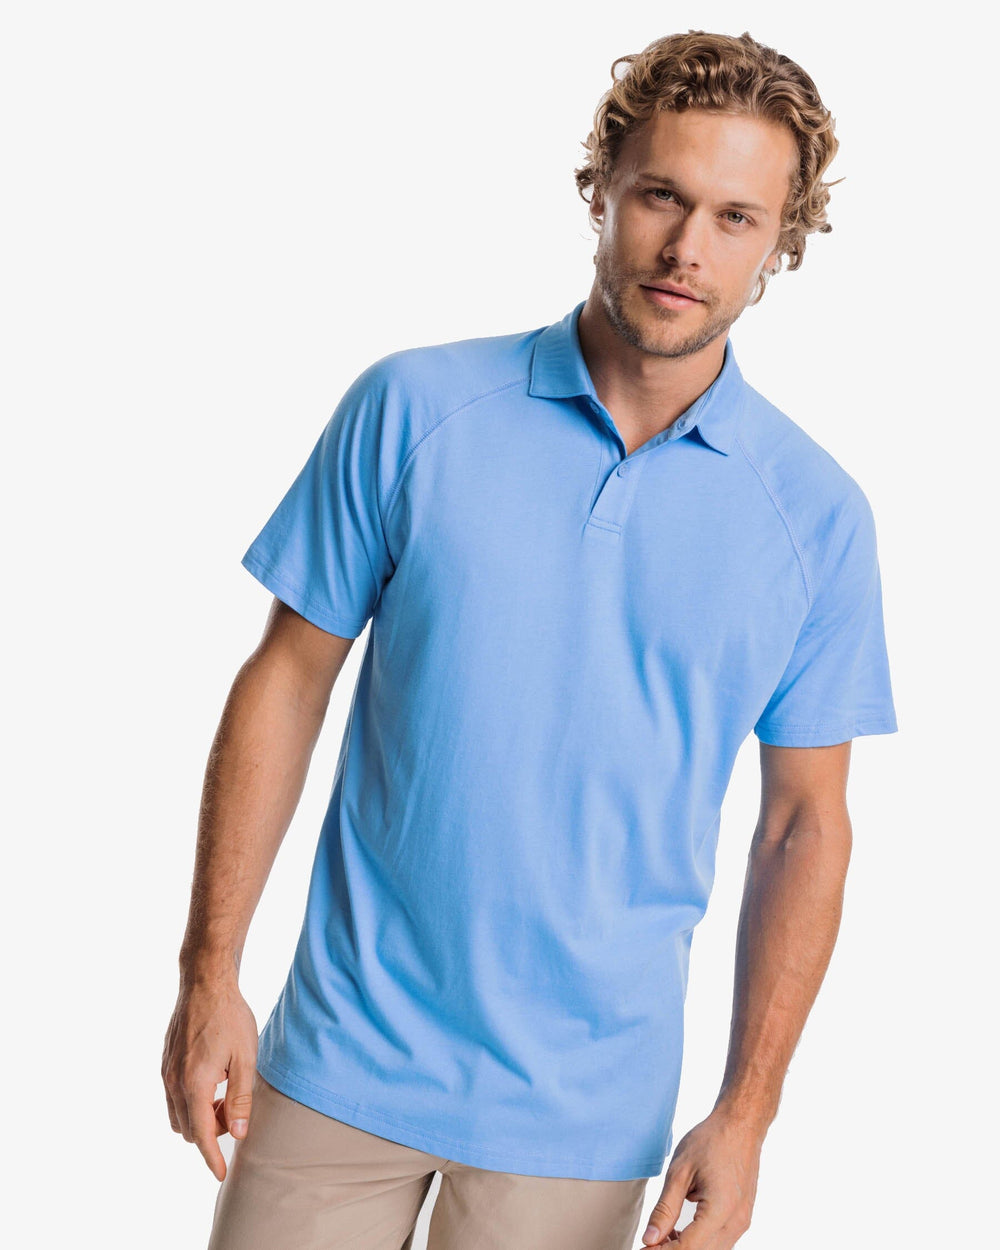 The front view of the Southern Tide Racquet Polo Shirt by Southern Tide - Boat Blue